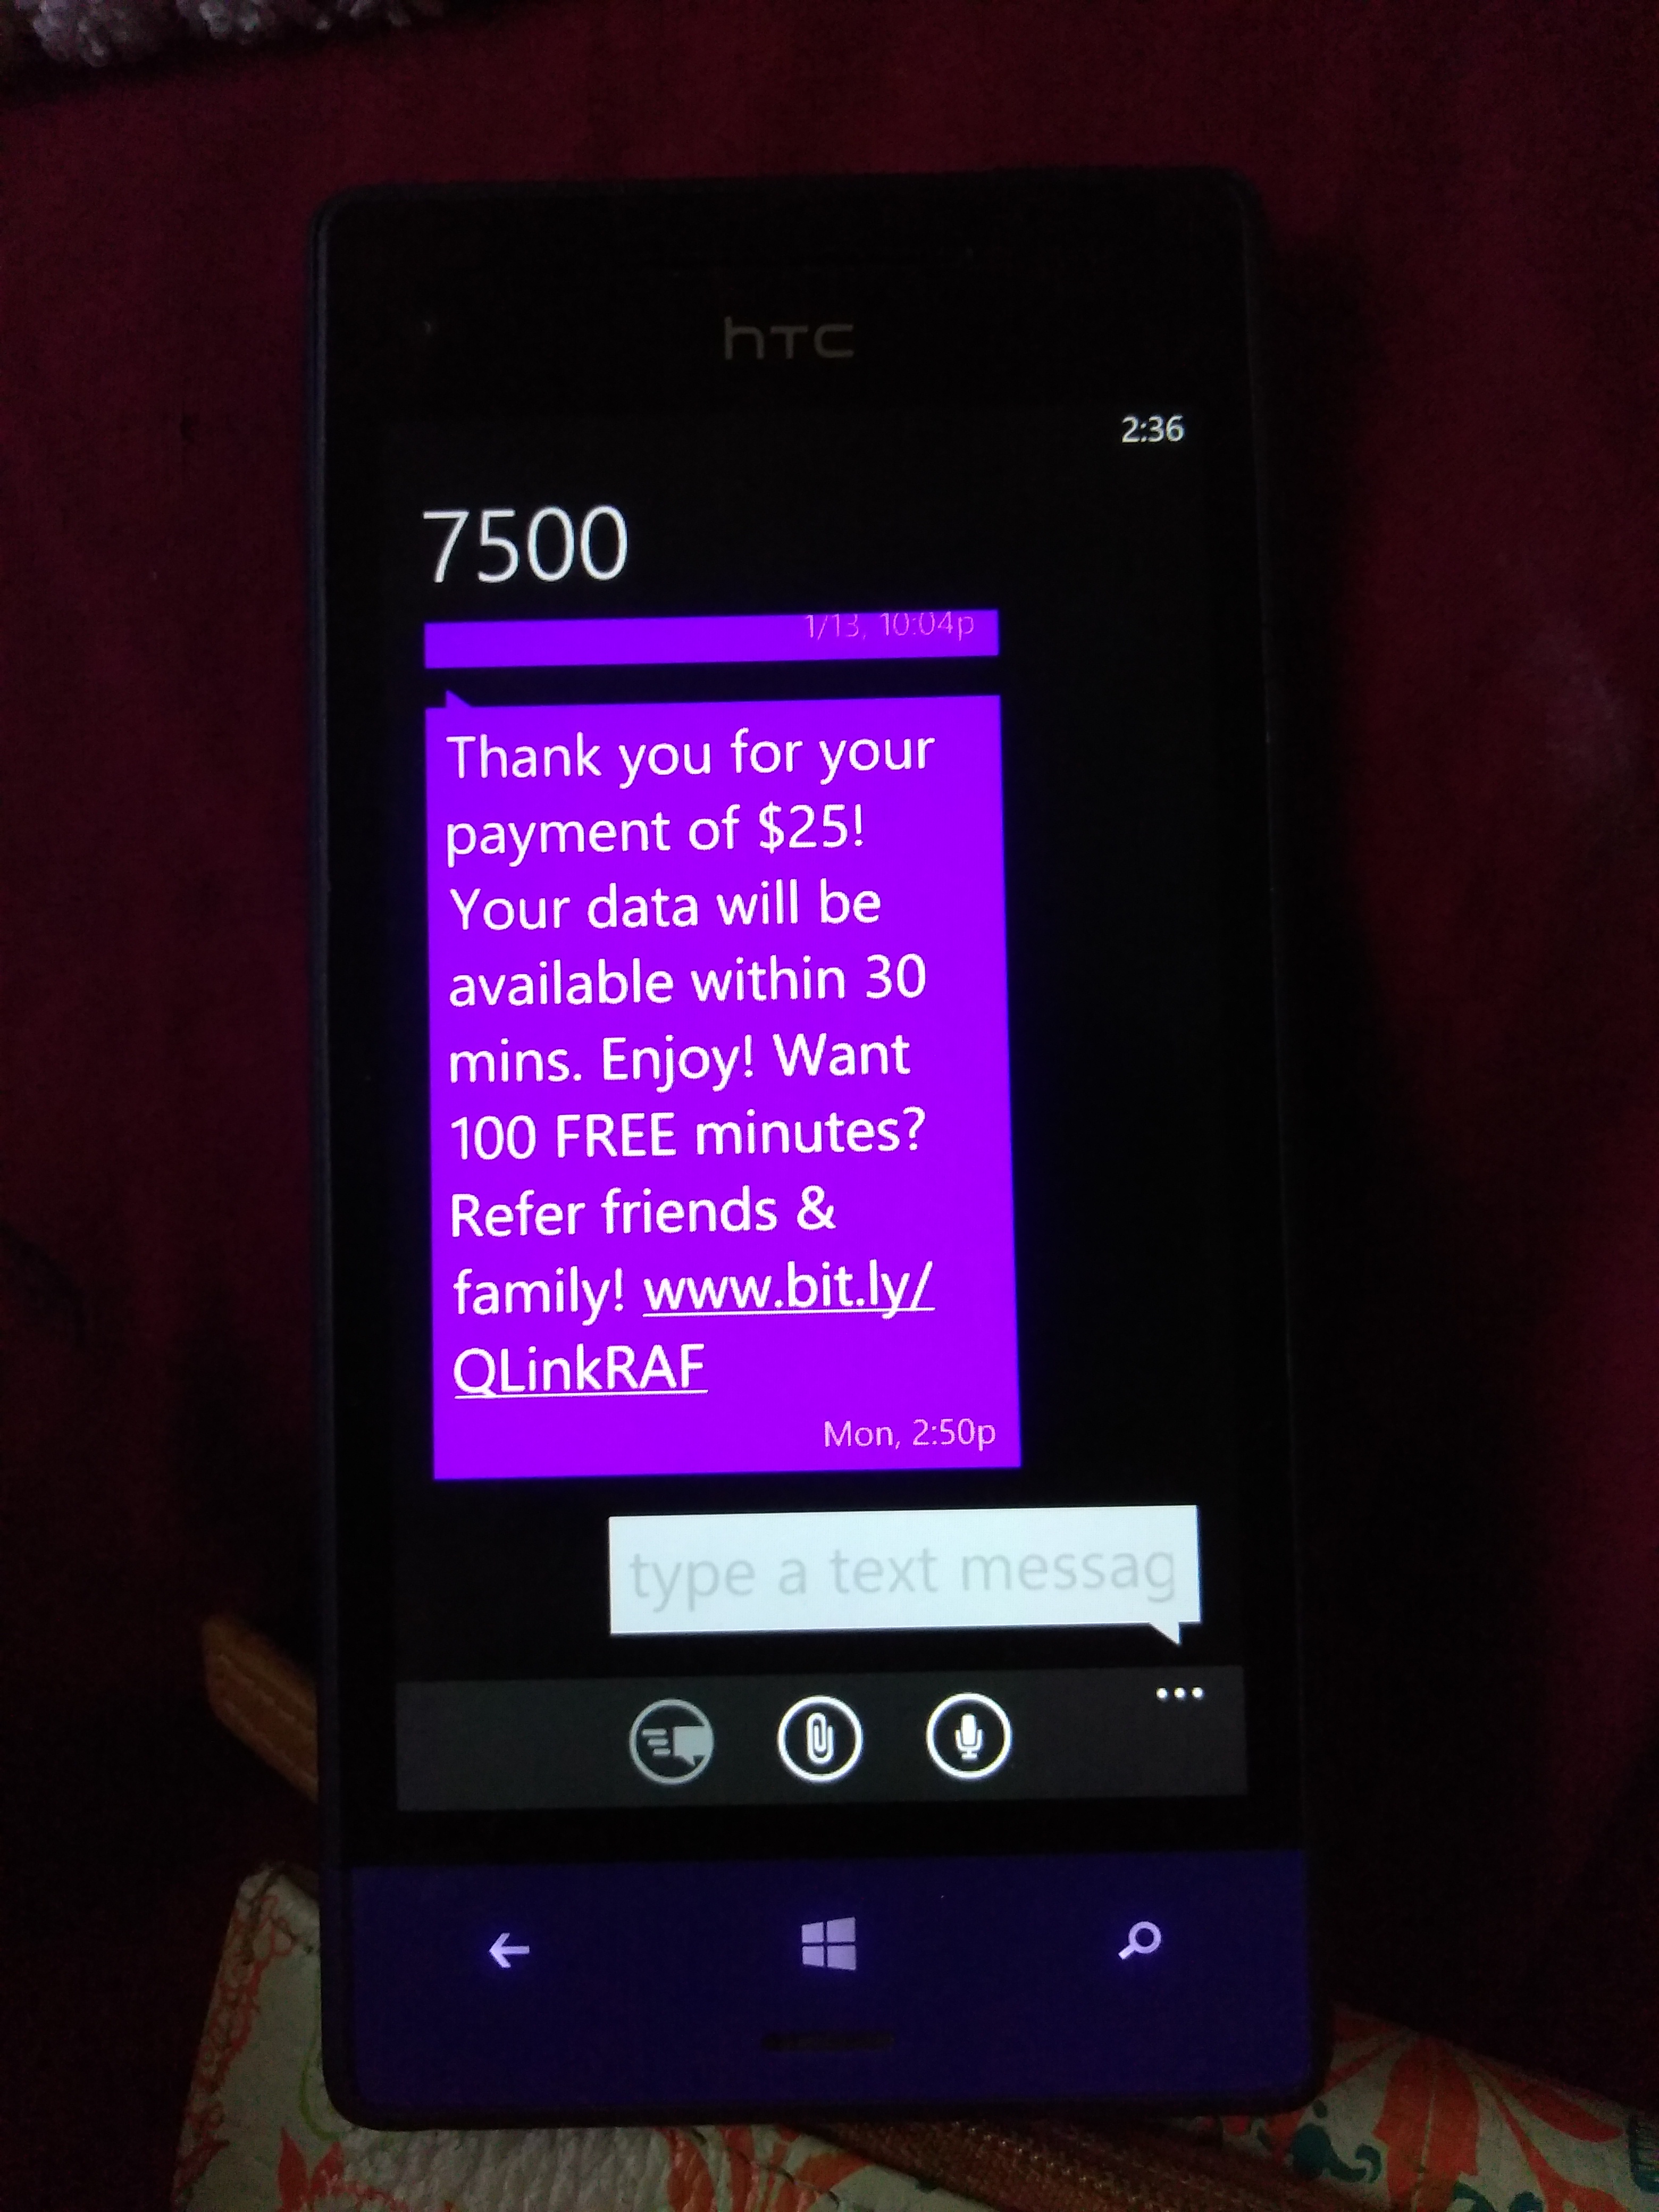 Text sent yesterday from Qlink stating they received payment